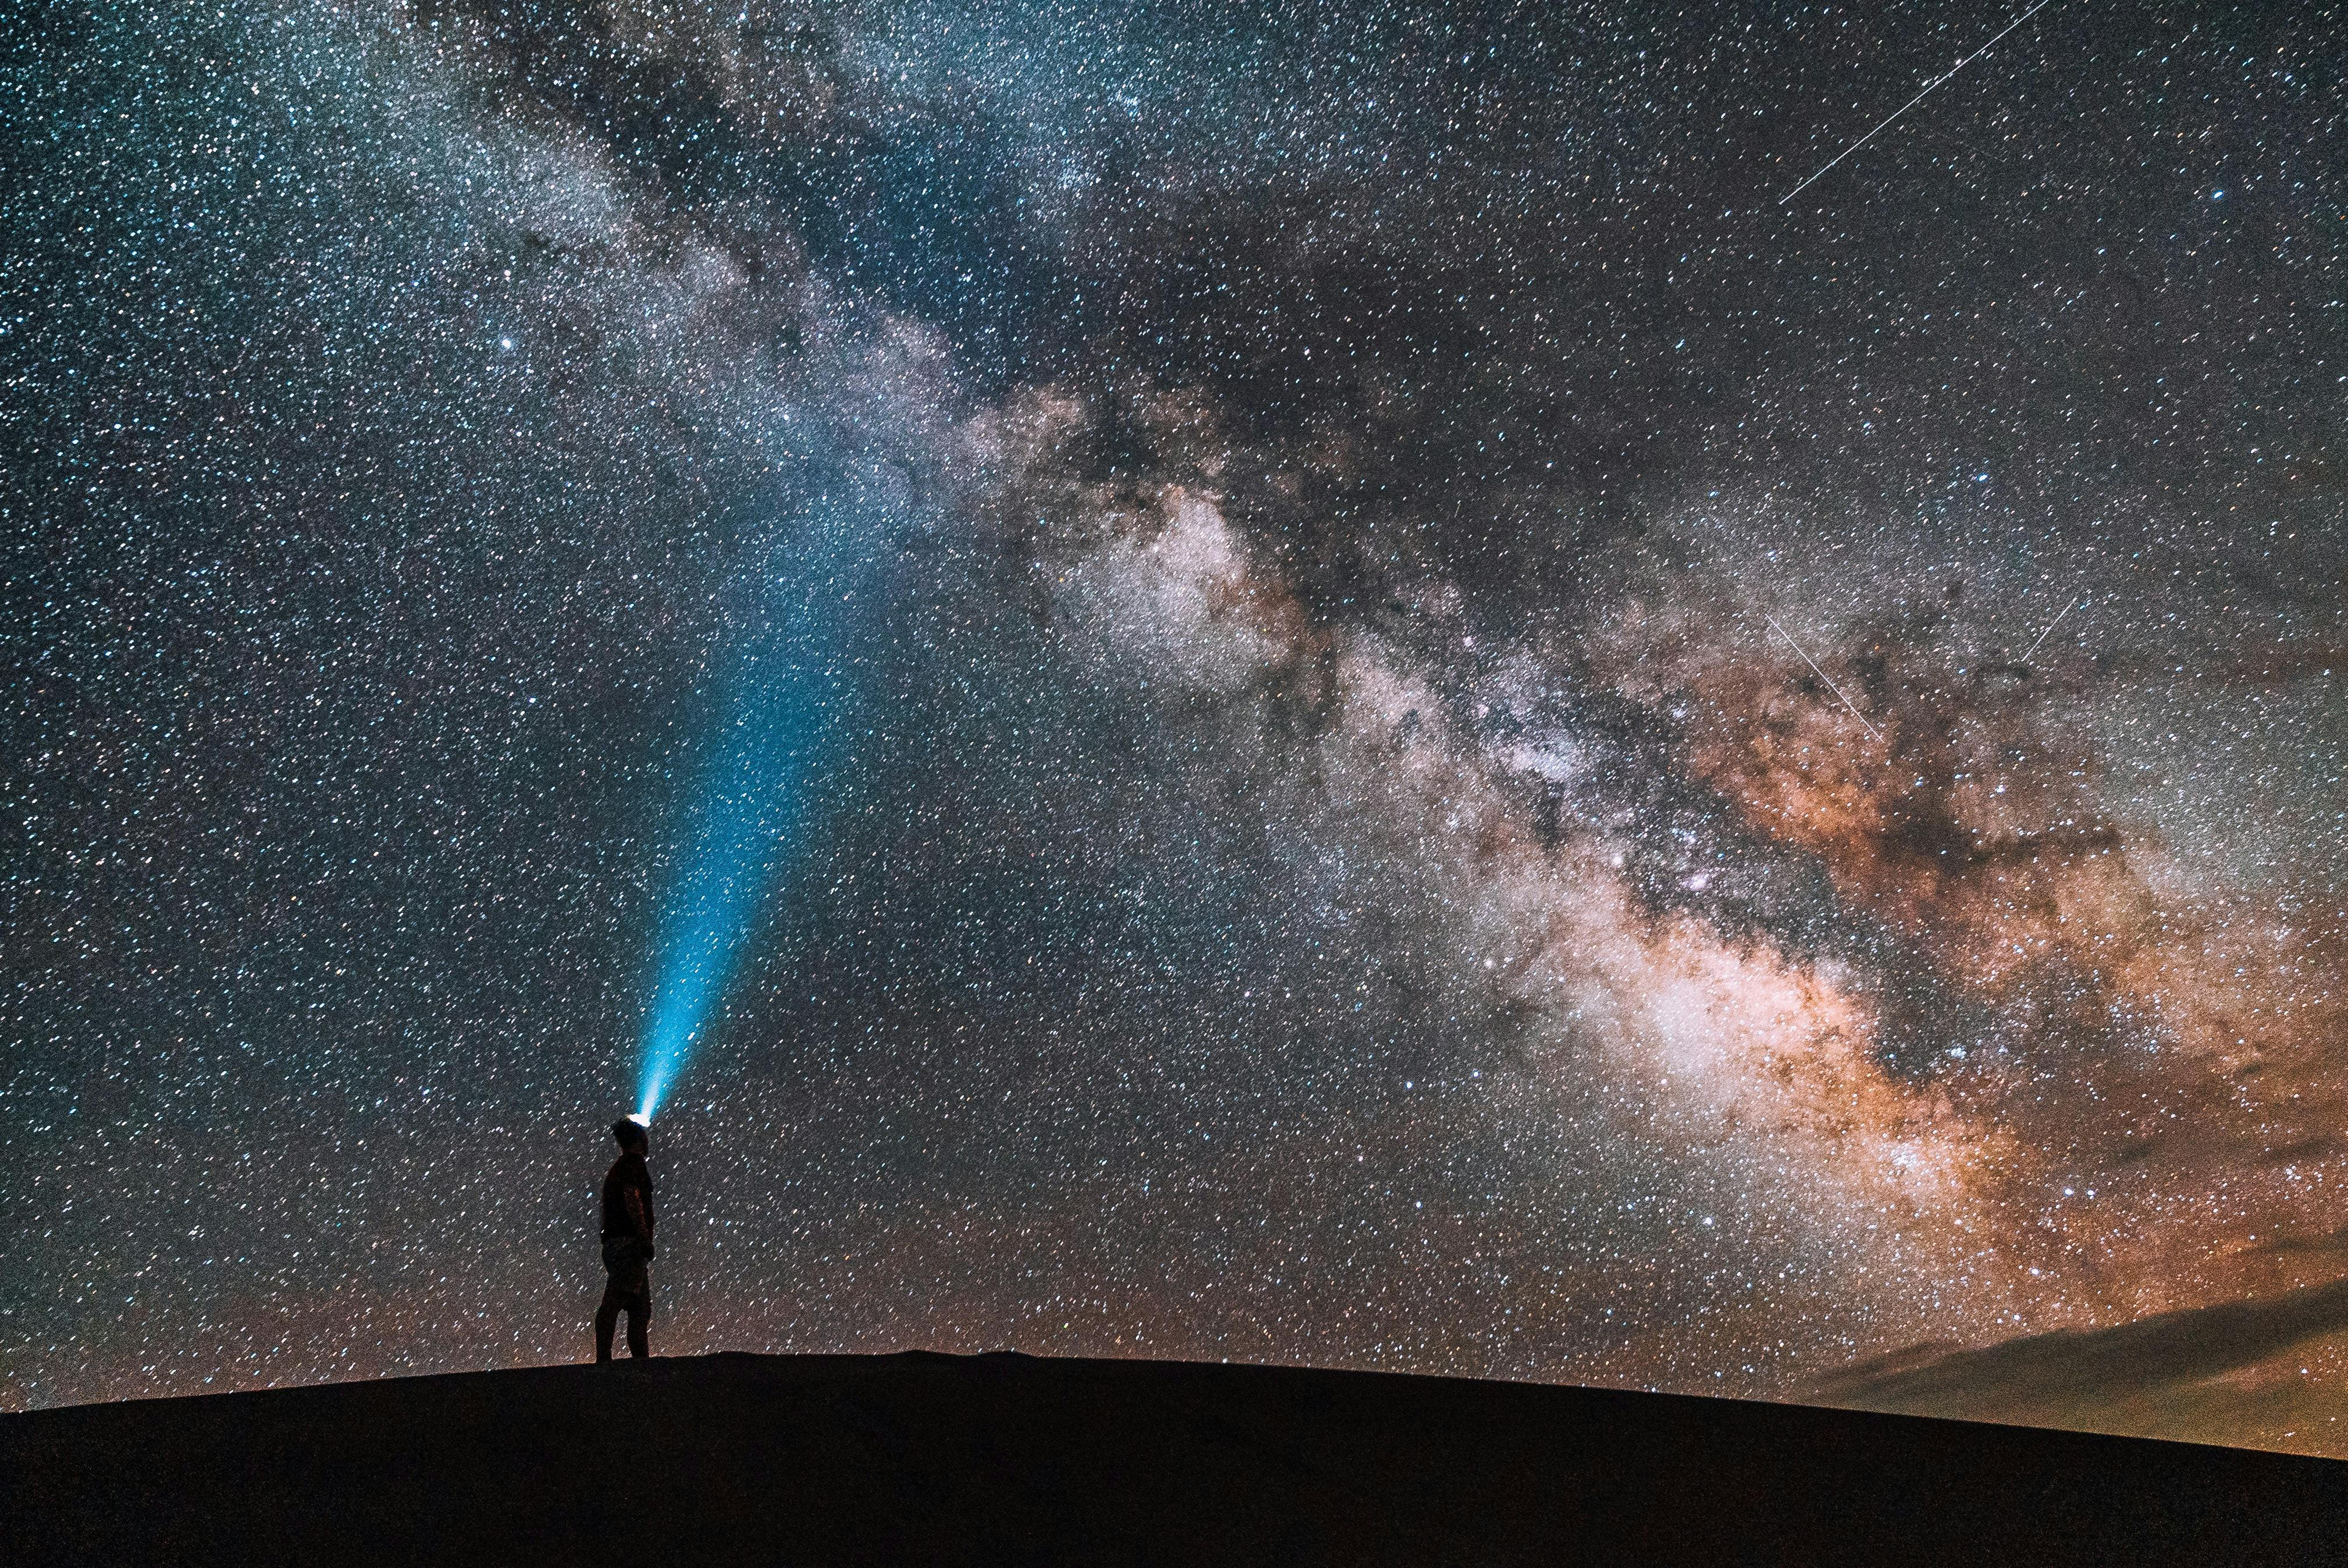 Someone stands on a ridgeline and shines a beam into the night sky. The Milky Way shines bright and the sky is crowded with stars. 